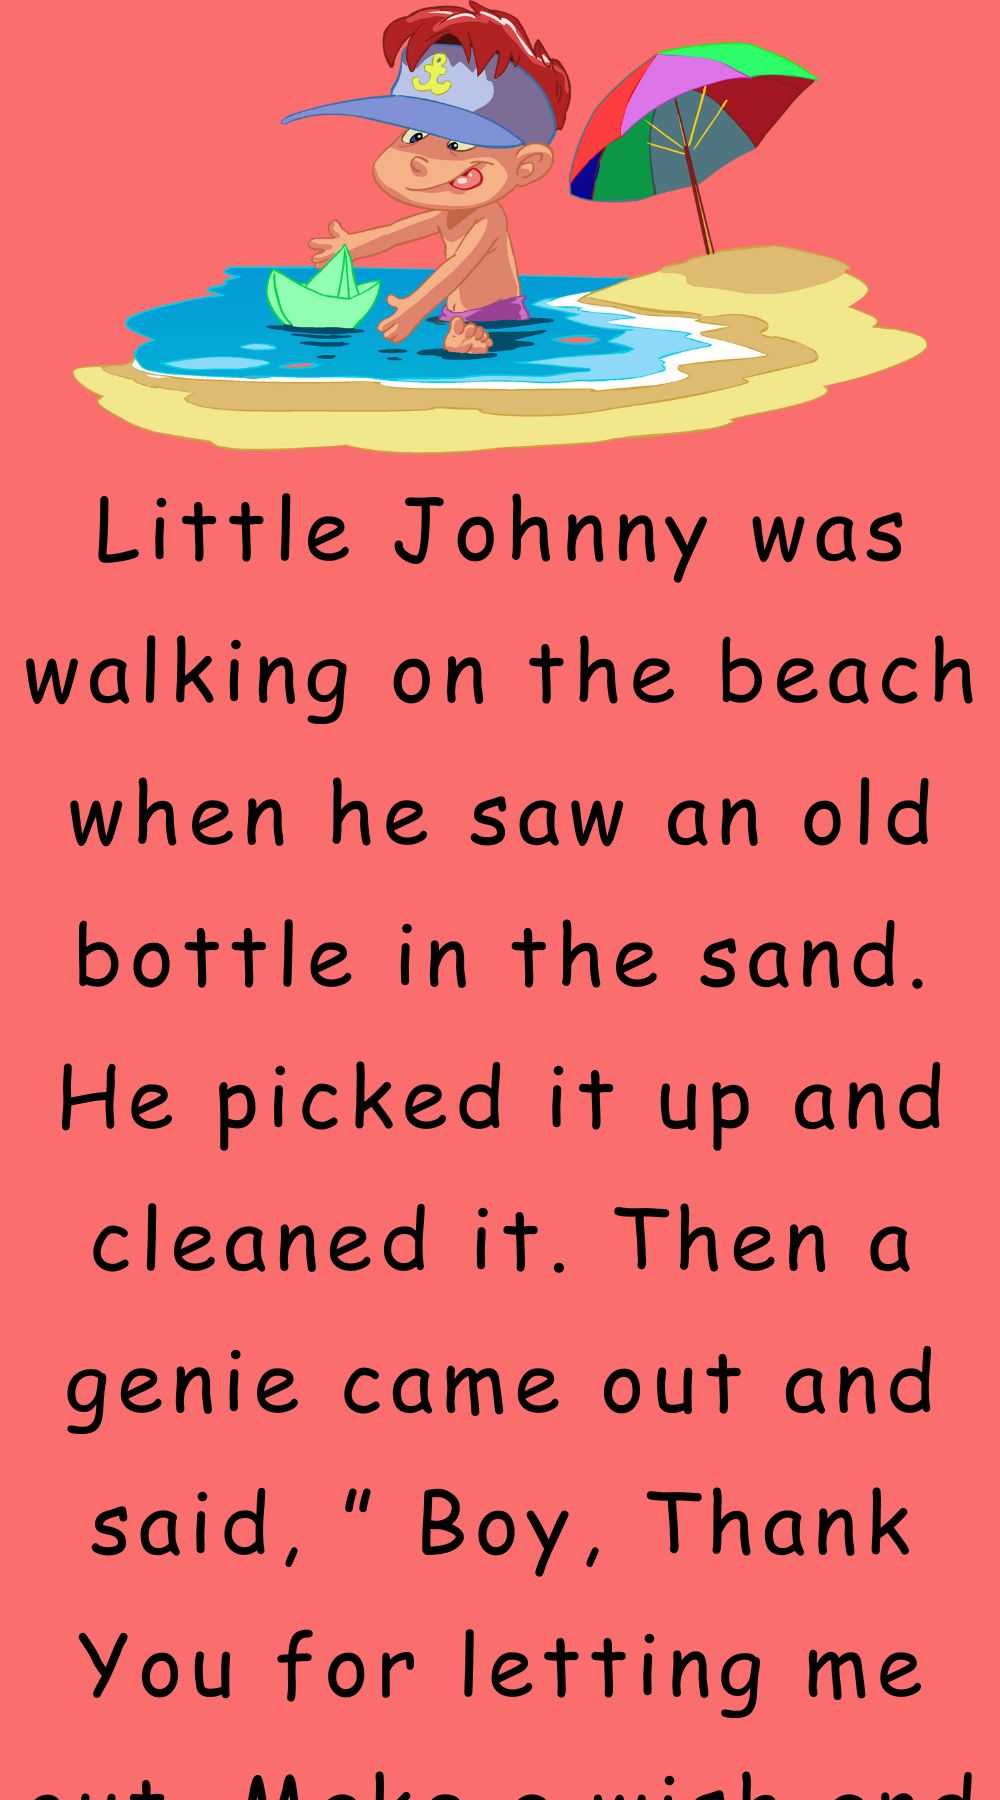 Little Johnny was walking on the beach